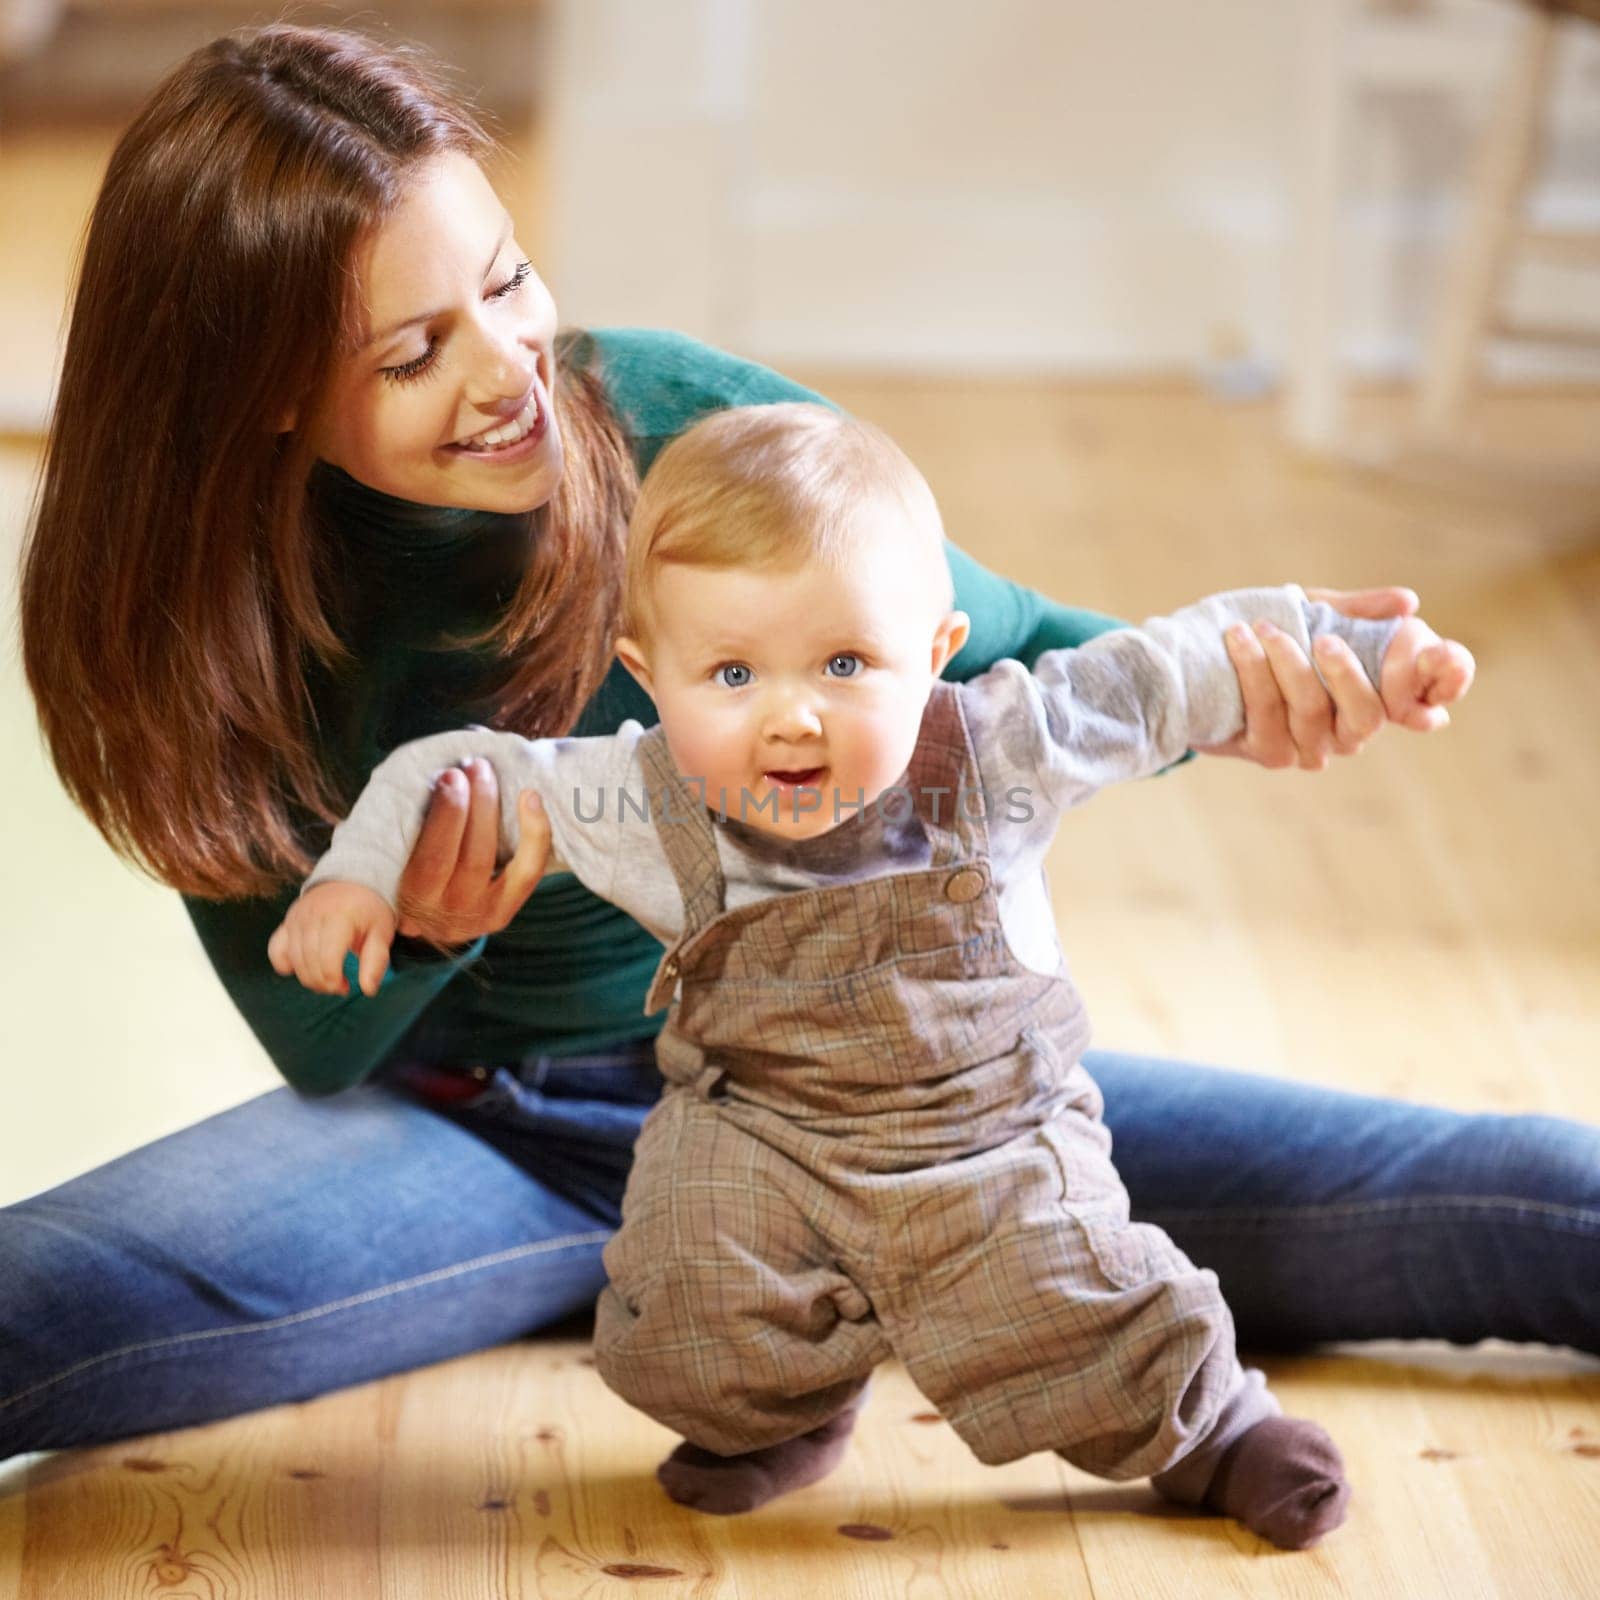 Mother, baby and smile for help with standing for development, motor skills or walking with assistance. Boy, infant or toddler with excited expression on face for future growth, milestone and support.